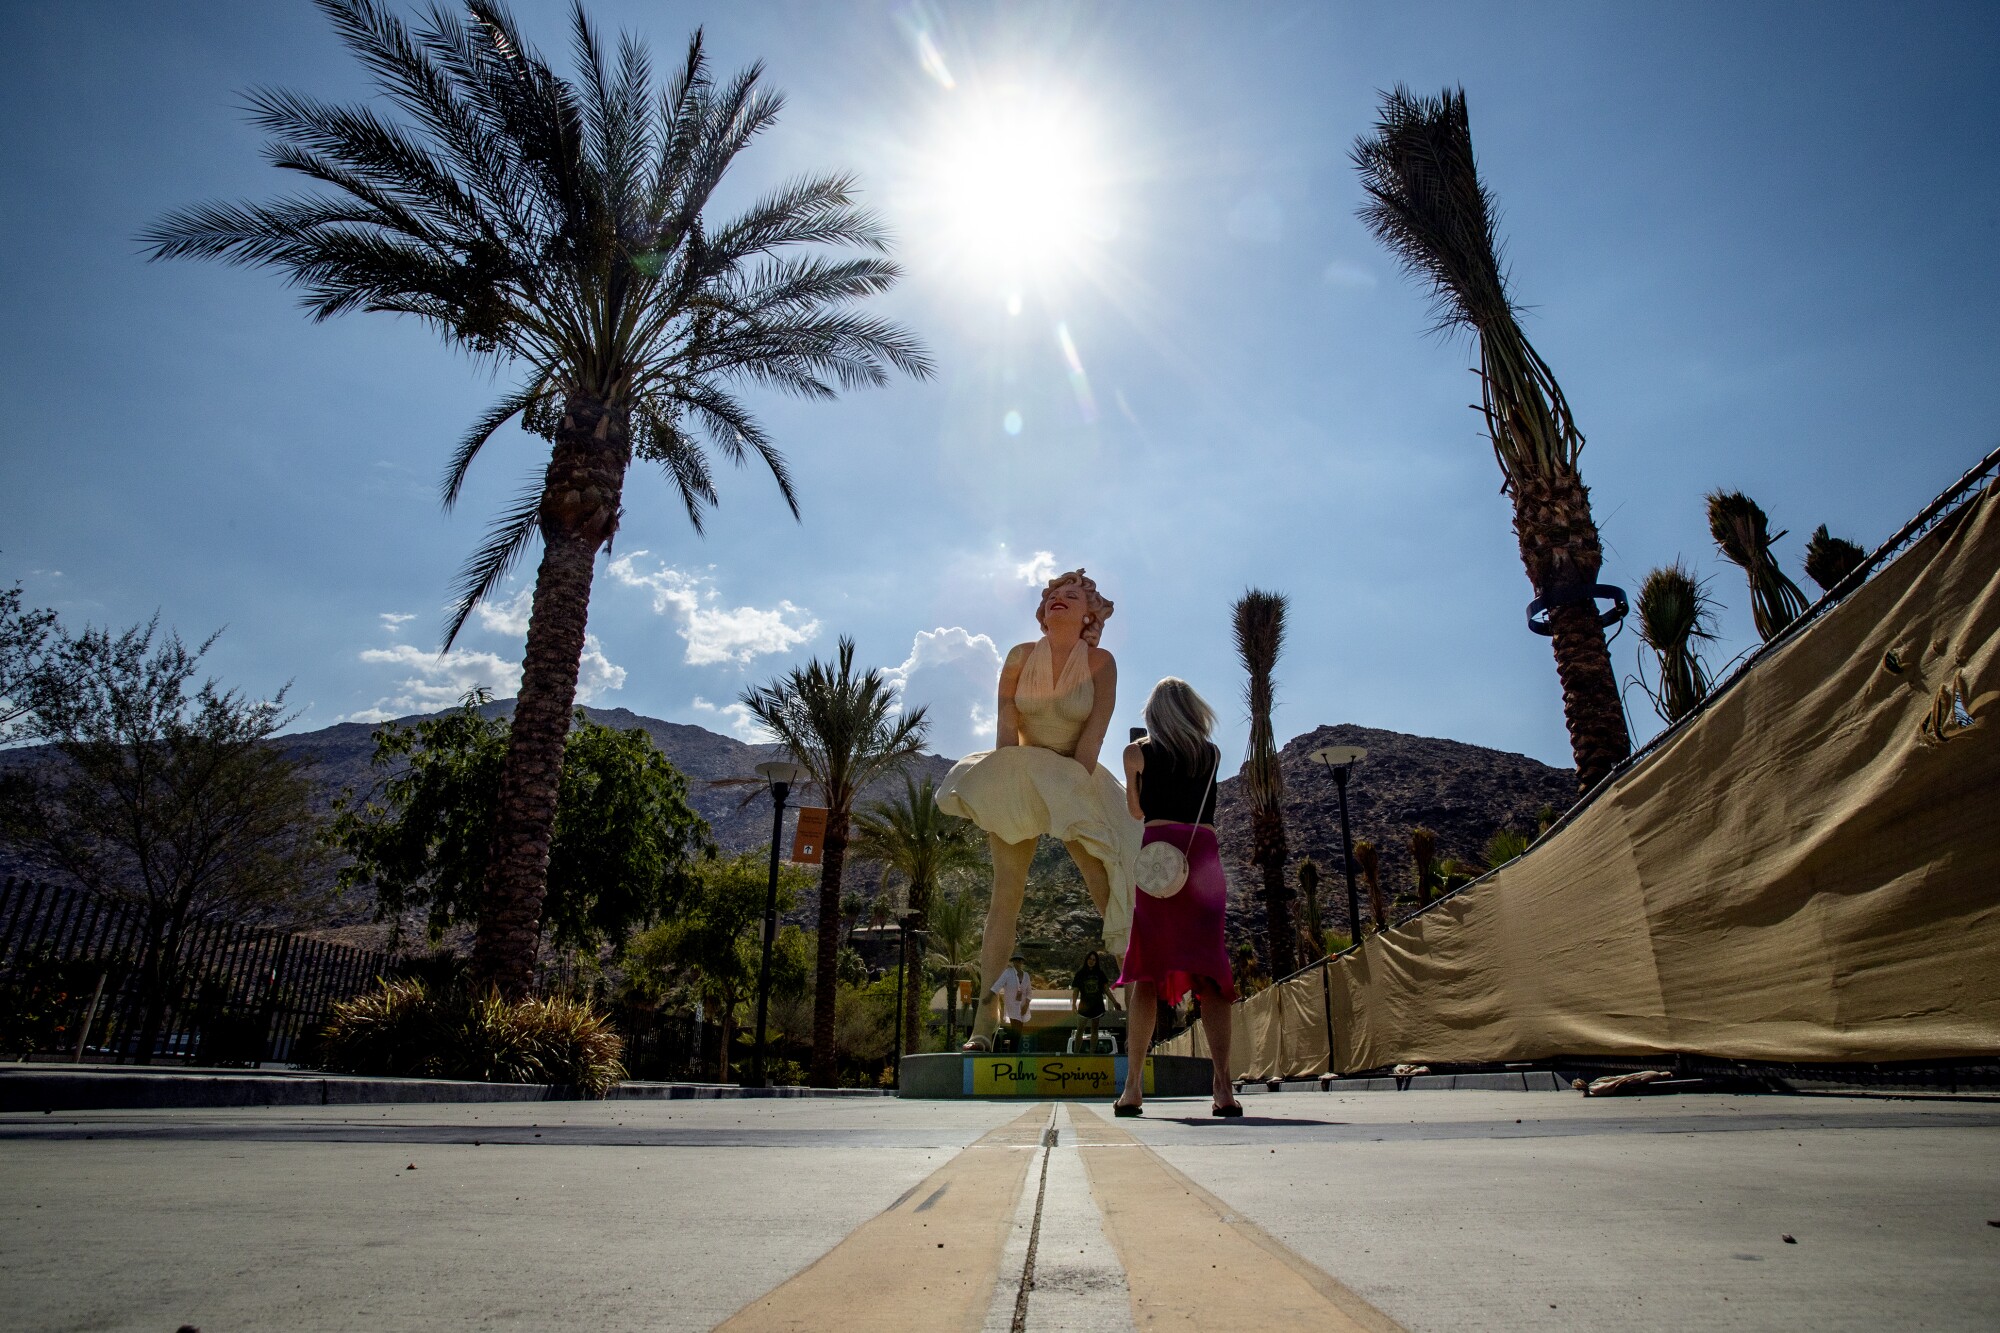 As the sun beats down on the Forever Marilyn statue, tourists stop for quick photos in 110 degree temps in Palm Springs